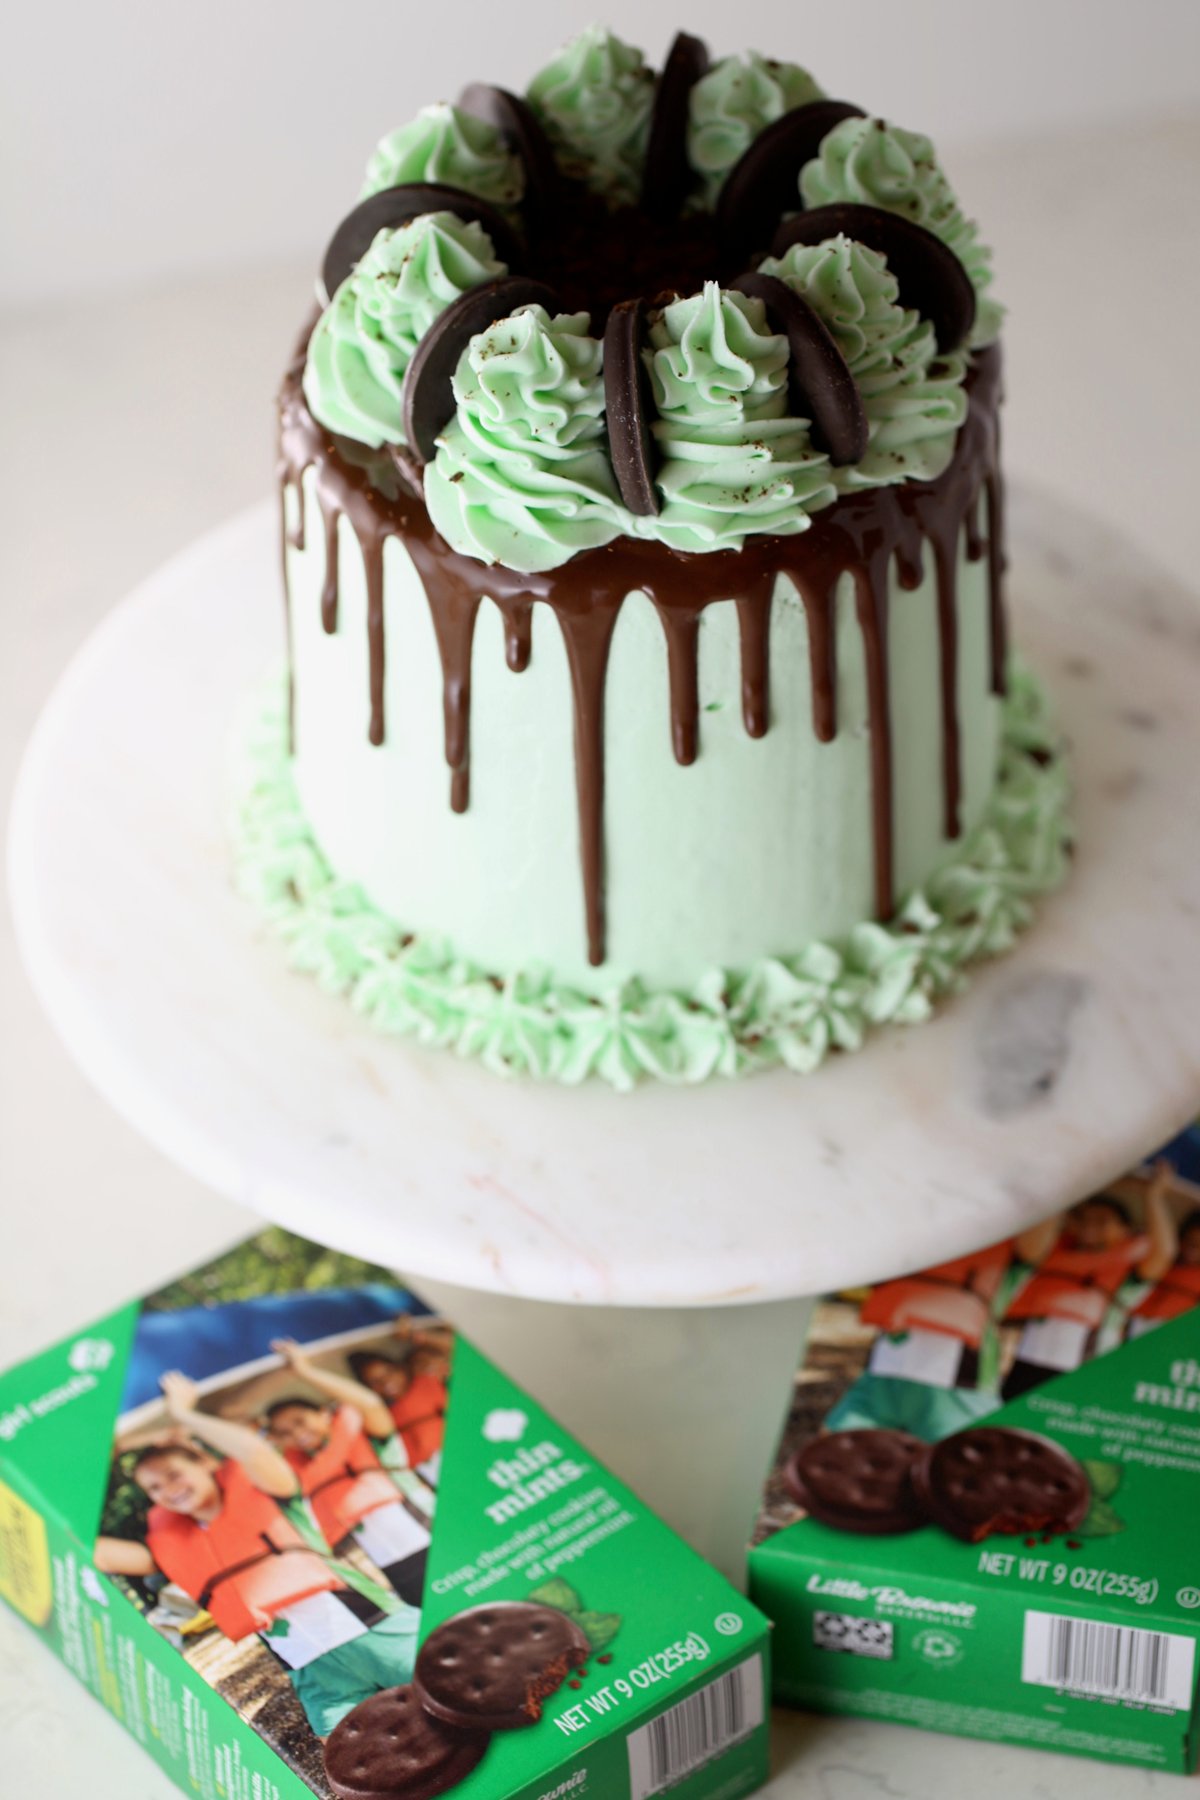 Boxes of Girl Scout Thin Mint cookies next to a mint chocolate cake.